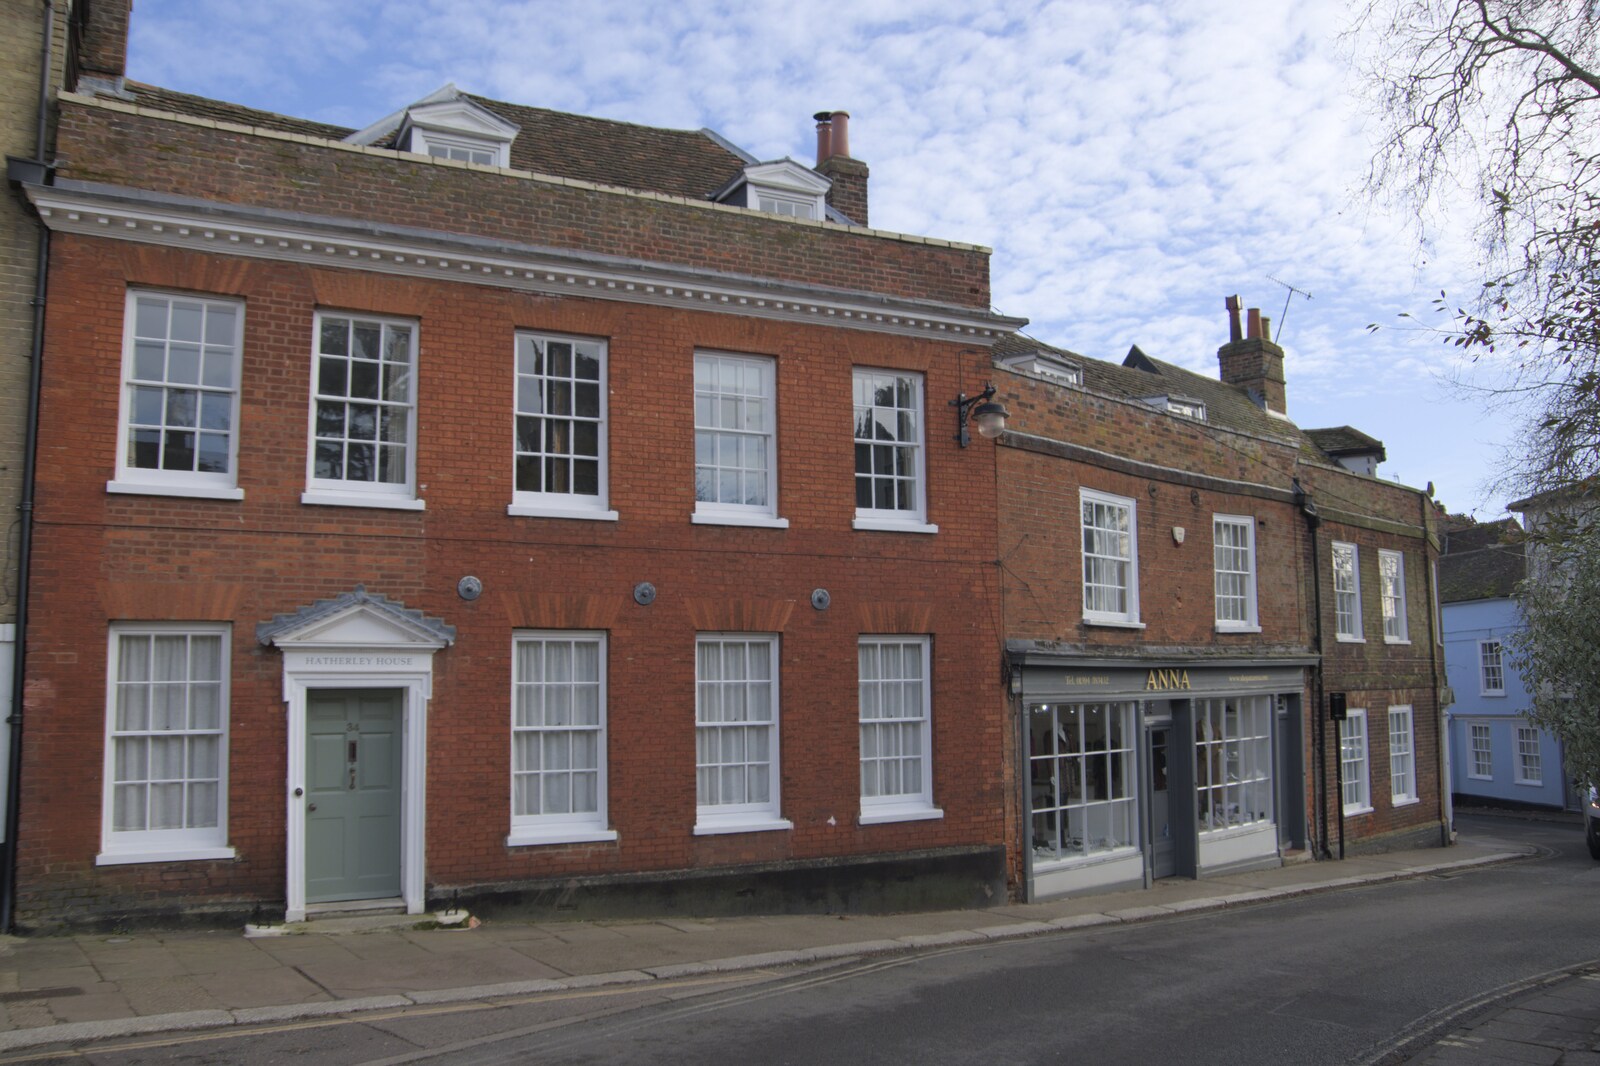 A nice Regency house on Church Street in Woodbridge from A February Miscellany, Diss and Woodbridge, Suffolk - 3rd February 2024